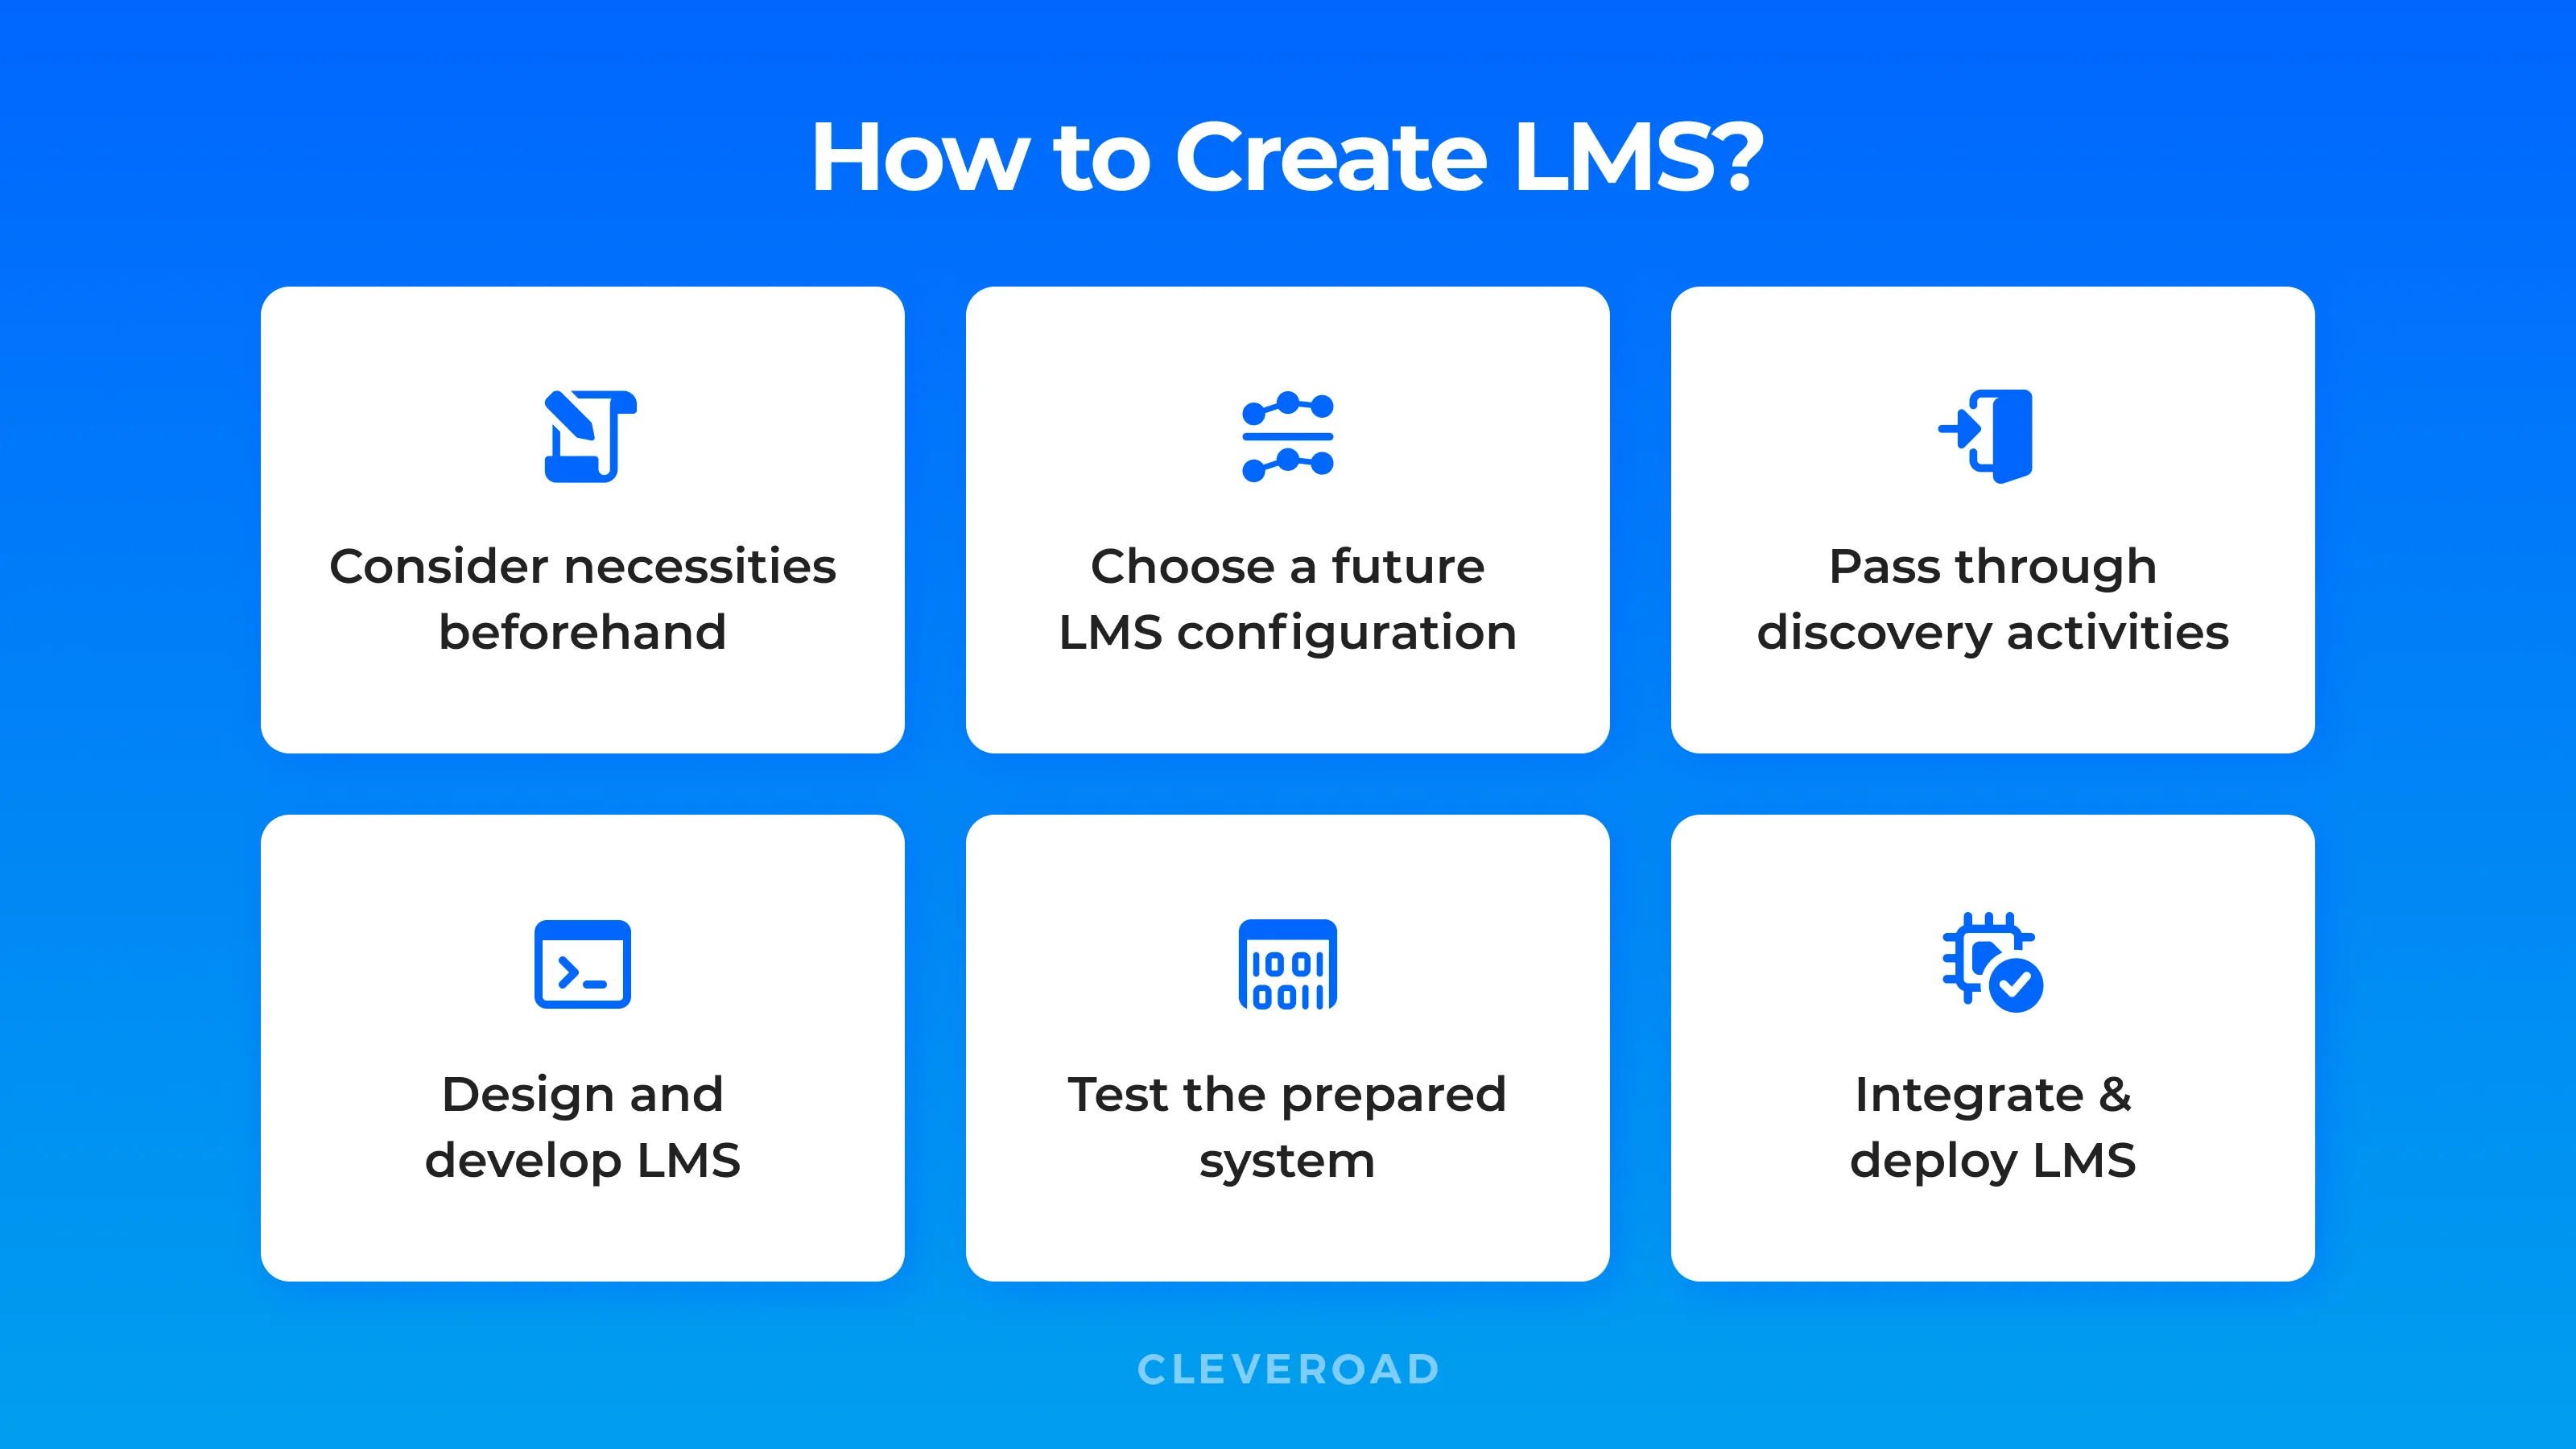 How to build LMS?